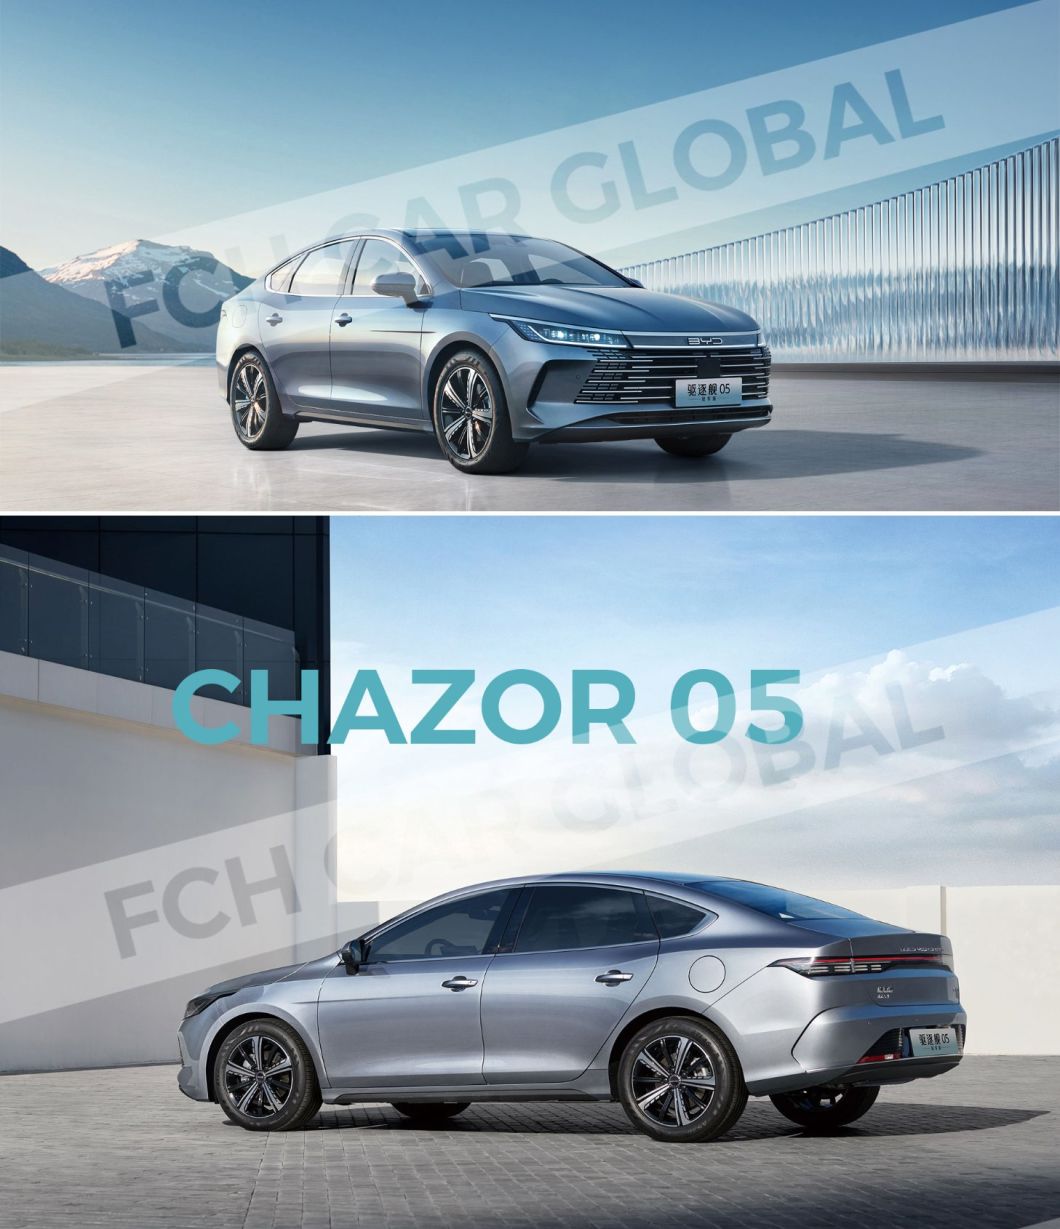 New 2023 Byd Genesis Edition Chazor 05 Limited Edition Electric Sedan with High Performance